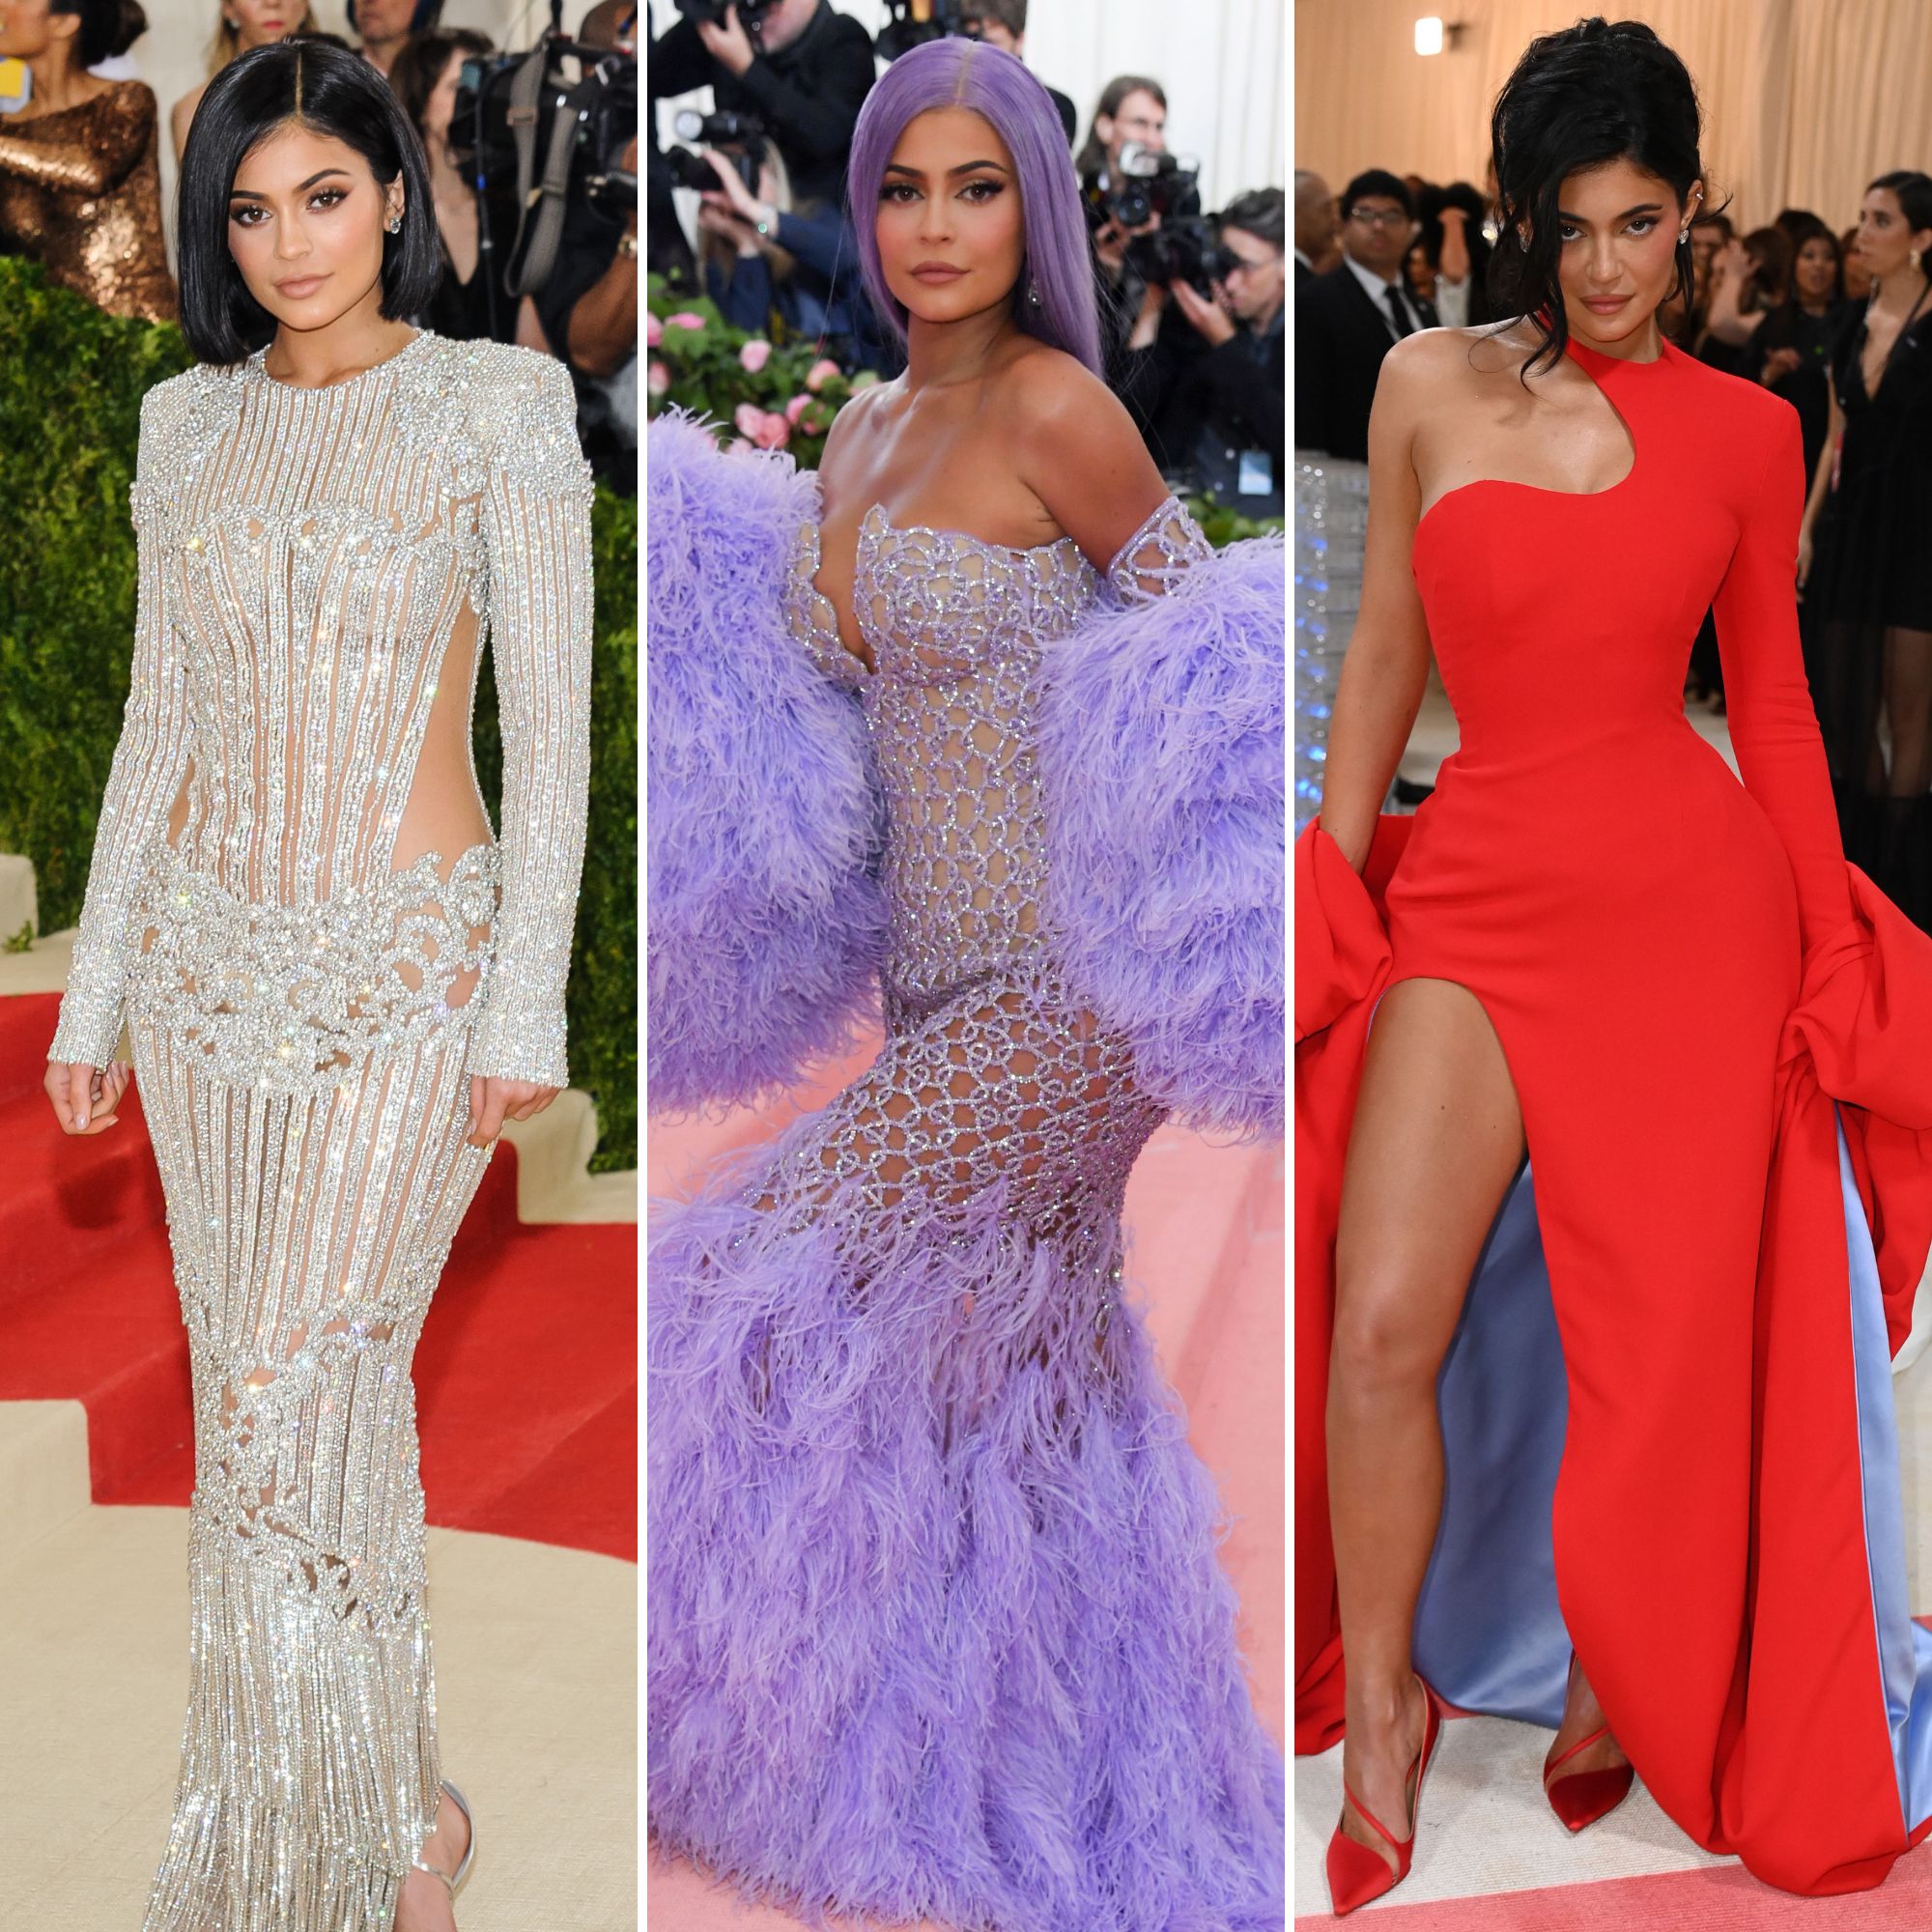 Kylie Jenner's Best Outfits of All Time: See Her Style Evolution